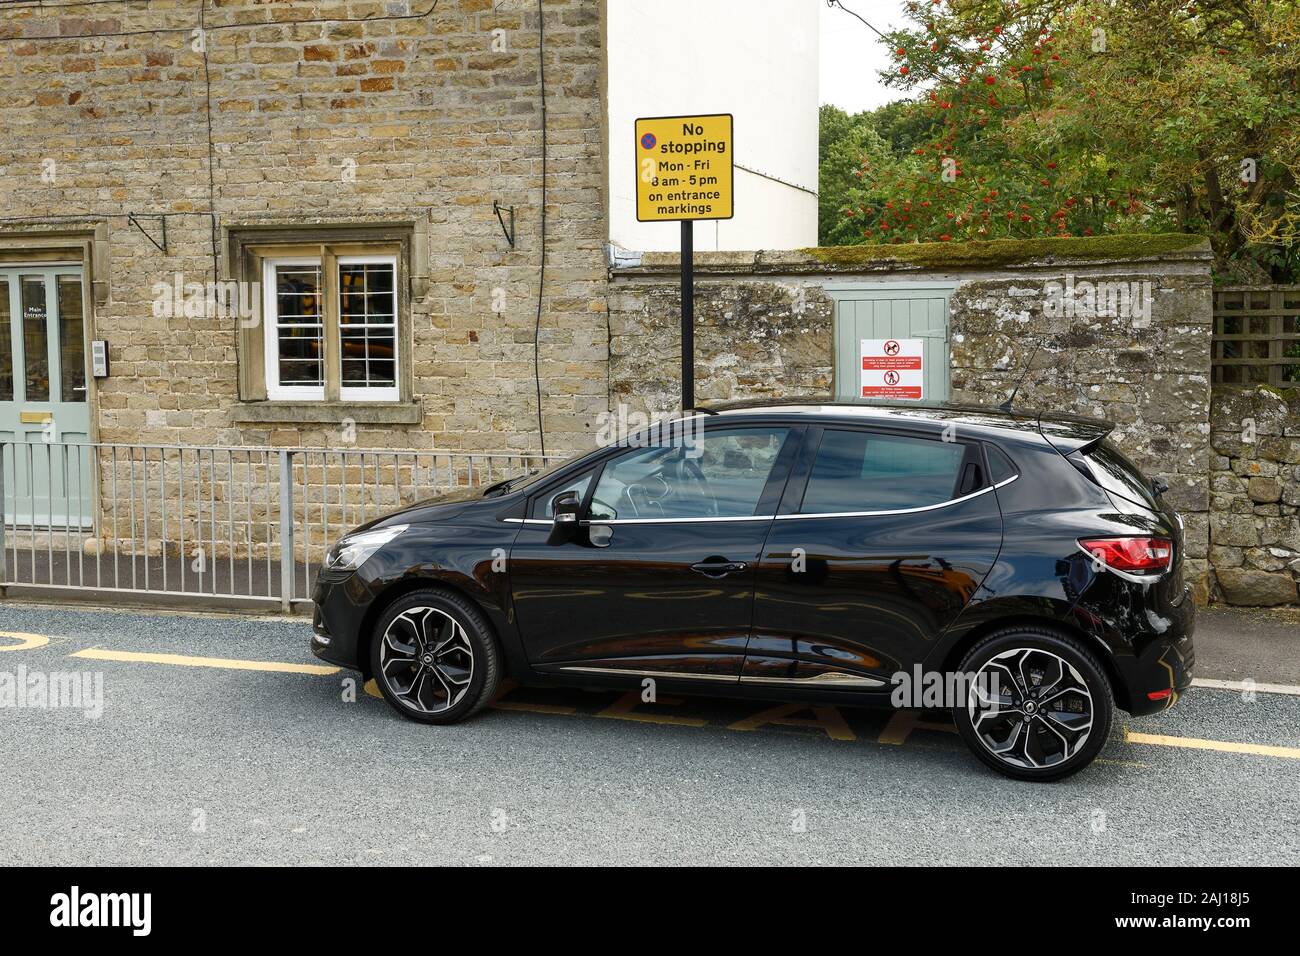 A car parked on alongside a No Stopping sign outside a school in Yorkshire UK Stock Photo